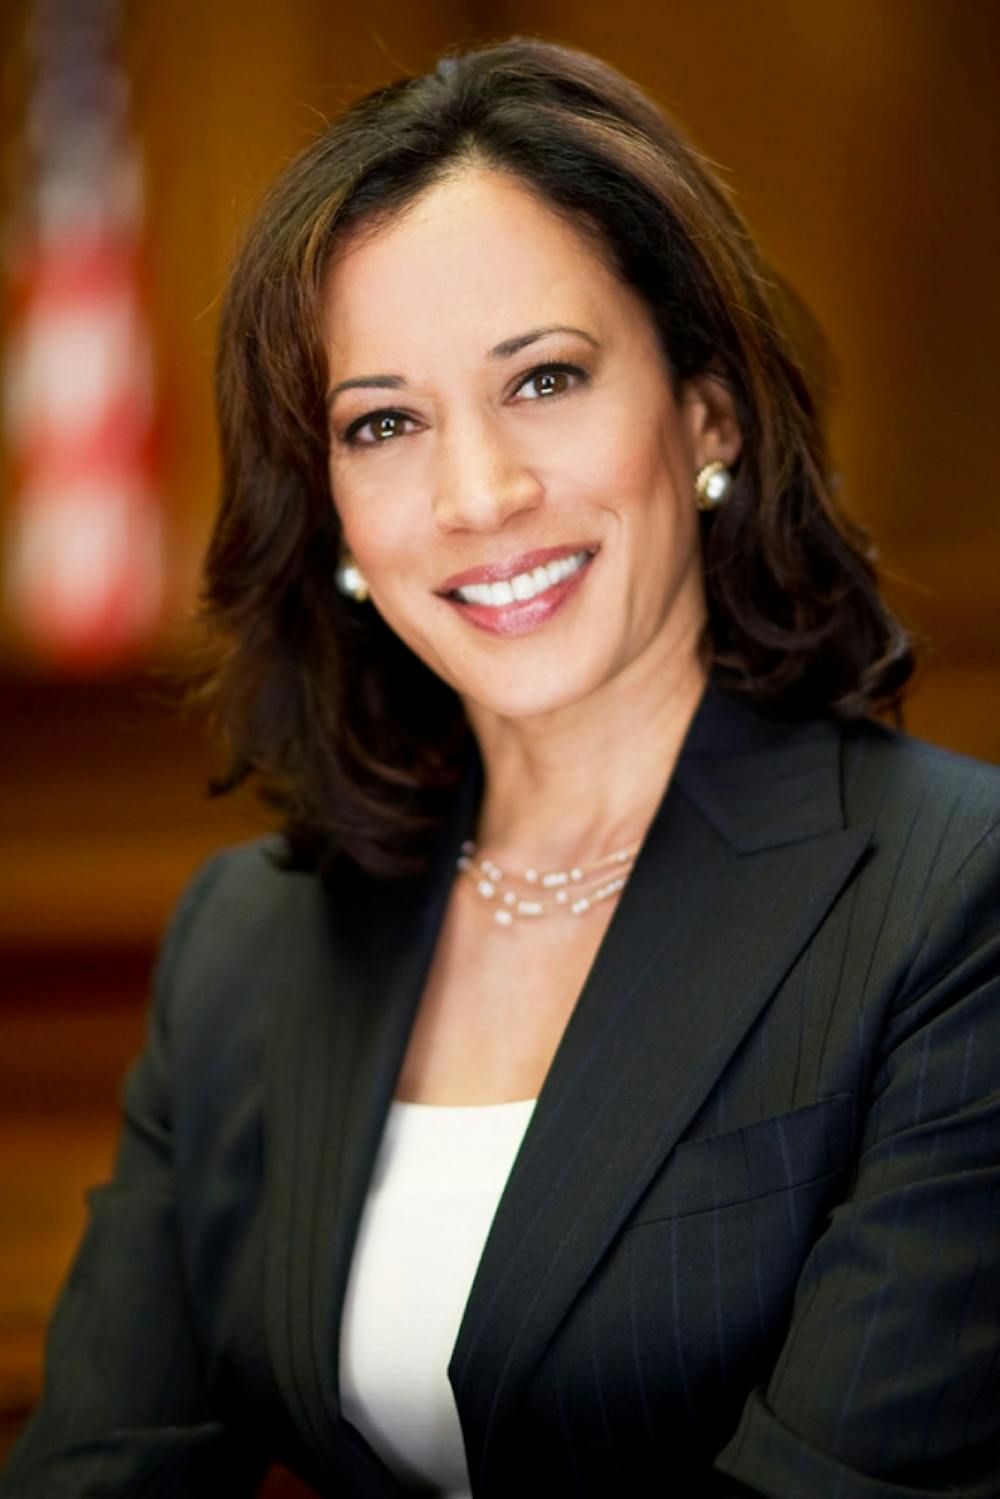 <span class="photocreditinline">COURTESY PHOTO</span><br />Sen. Kamala Harris is one of the candidates represented in Ben Wessel’s J-term course Winning Elections.